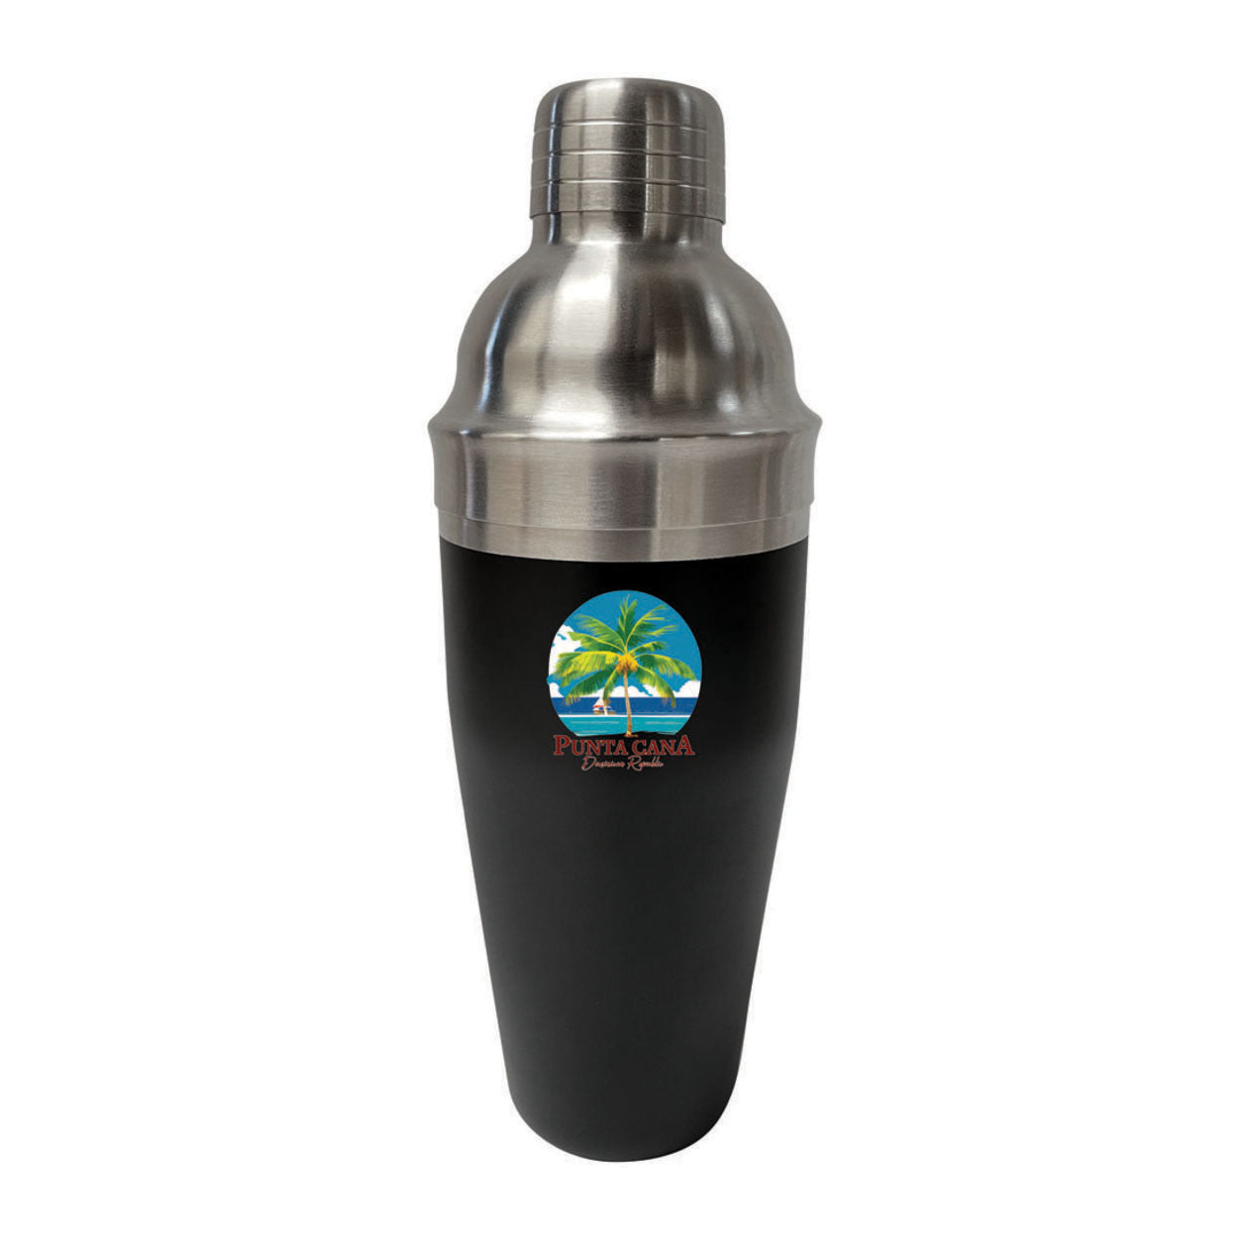 Punta Cana Dominican Republic Souvenir 24 Oz Stainless Steel Cocktail Shaker - Palm 2